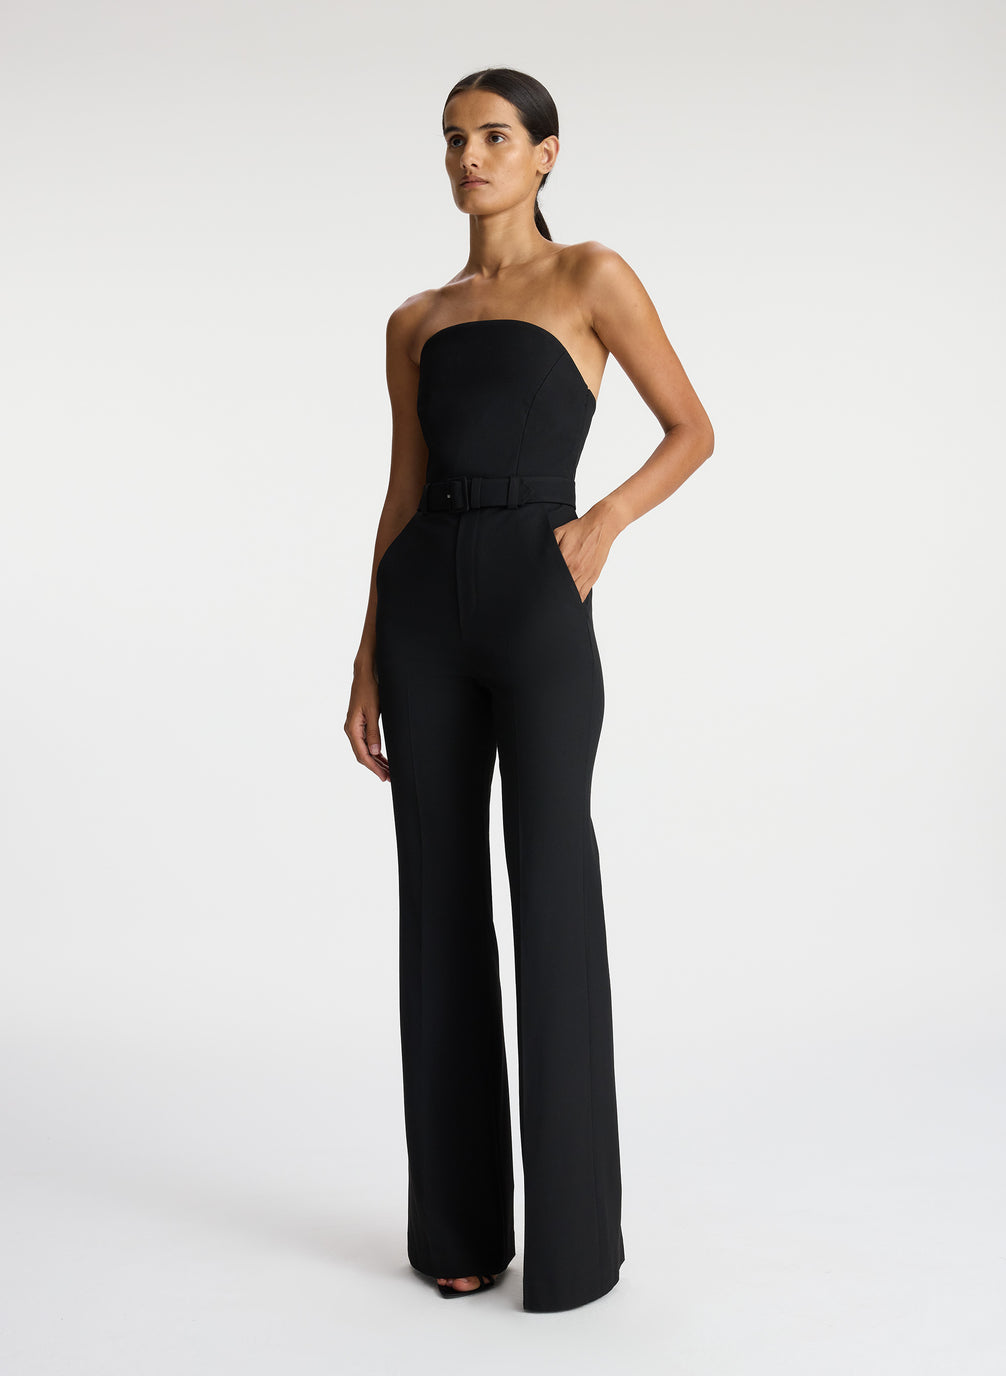 side view of woman wearing black strapless jumpsuit